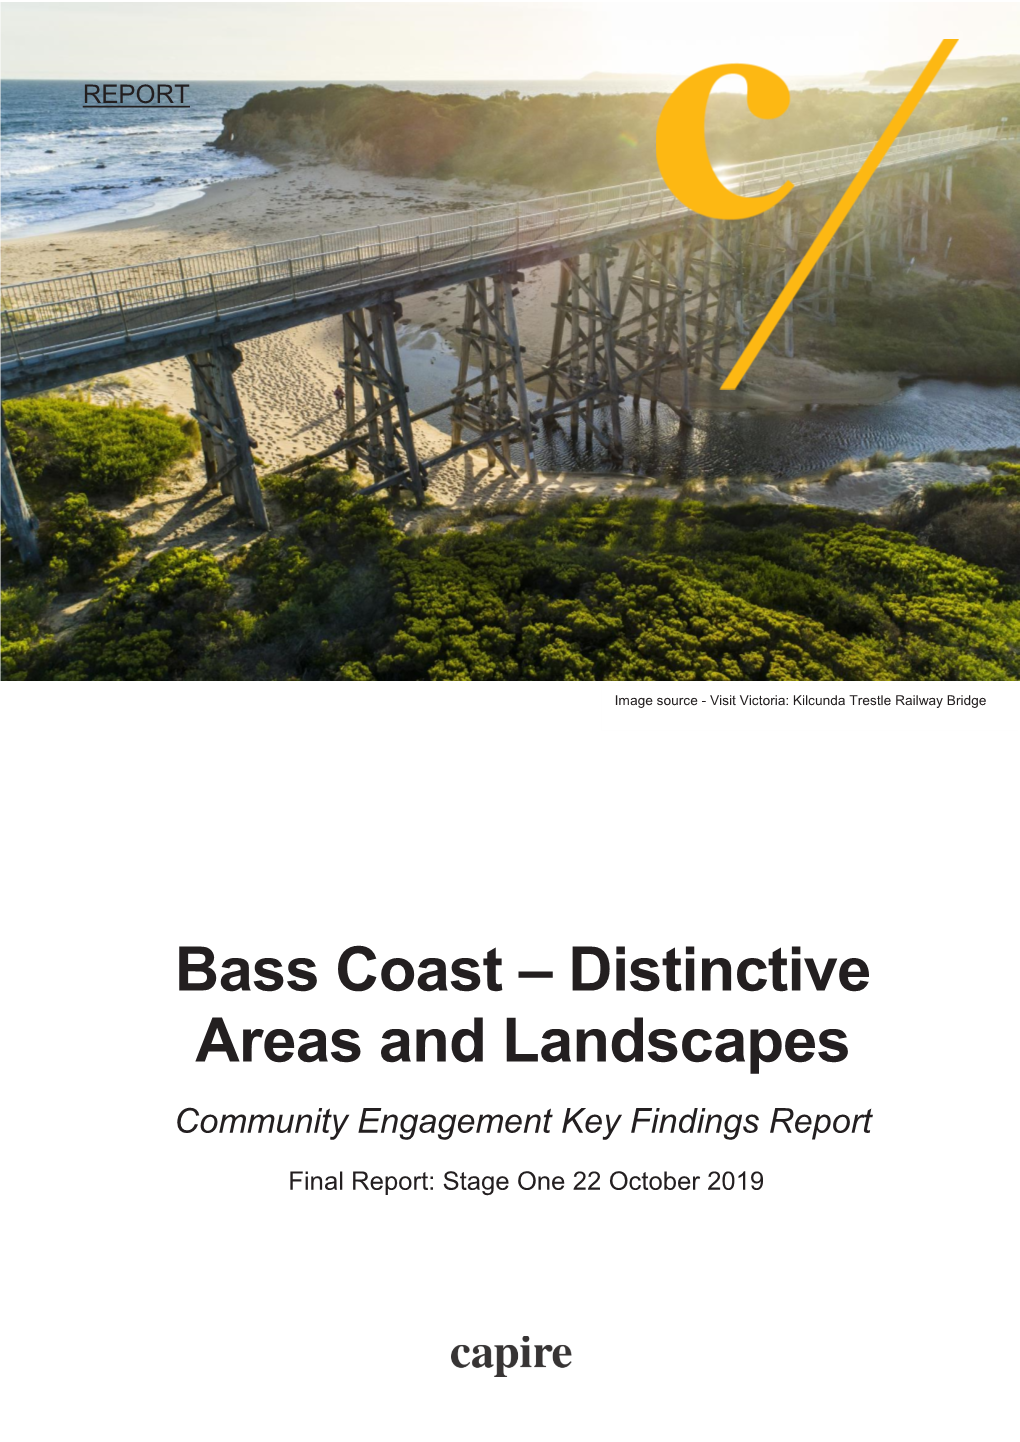 Bass Coast – Distinctive Areas and Landscapes Community Engagement Key Findings Report